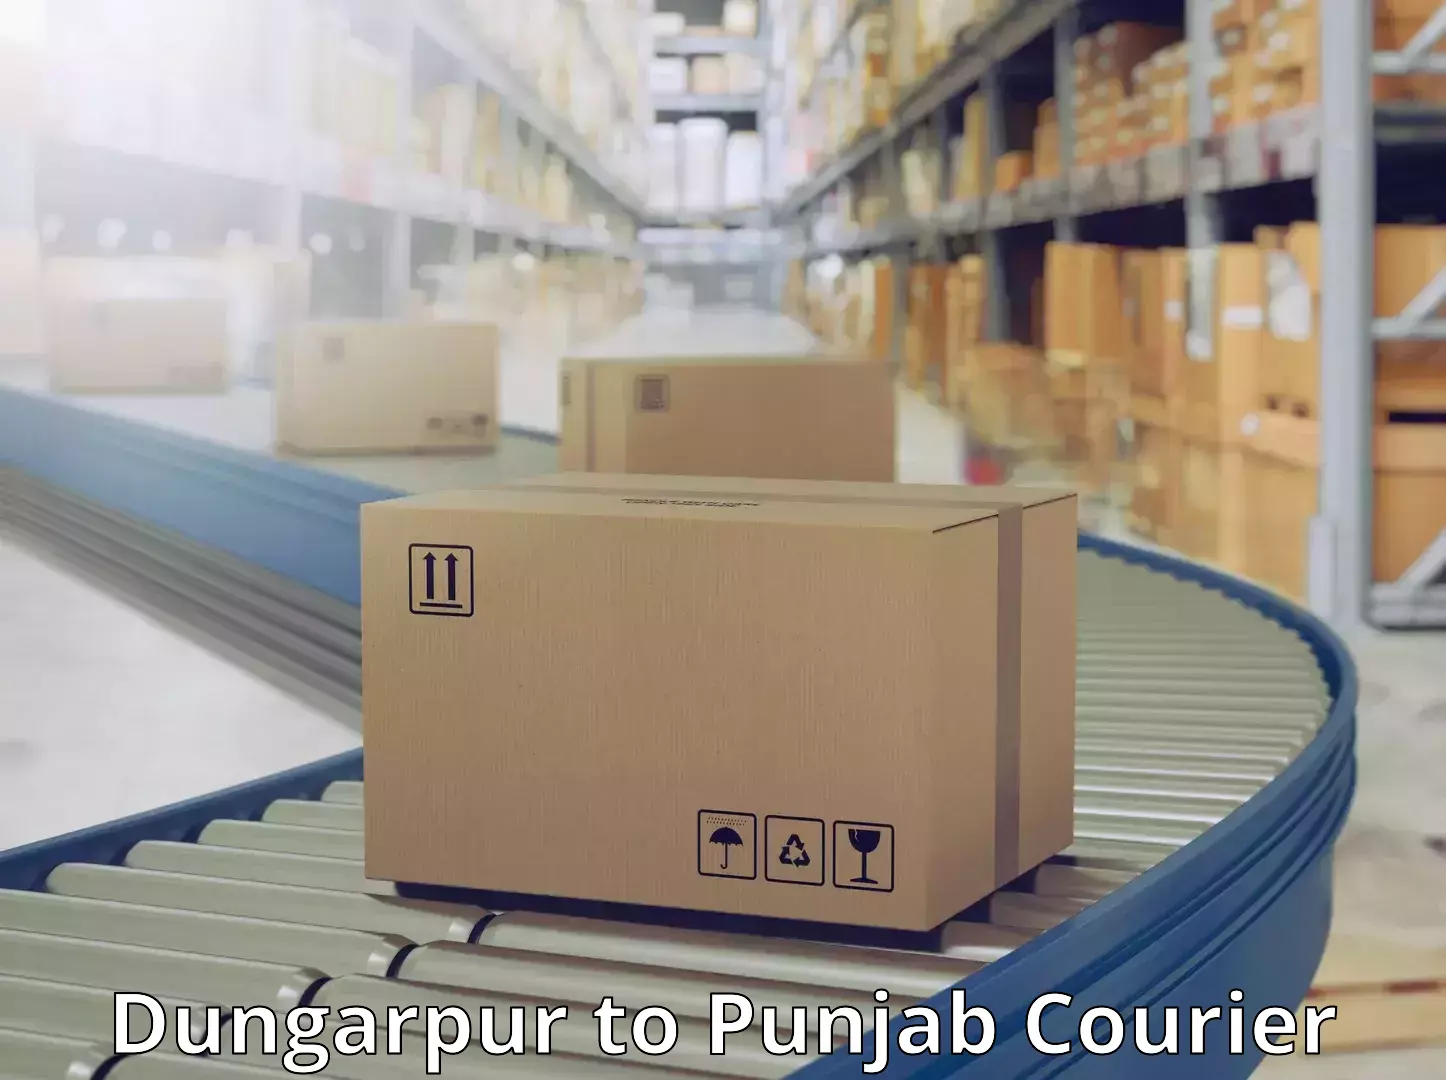 Efficient freight service Dungarpur to Pathankot